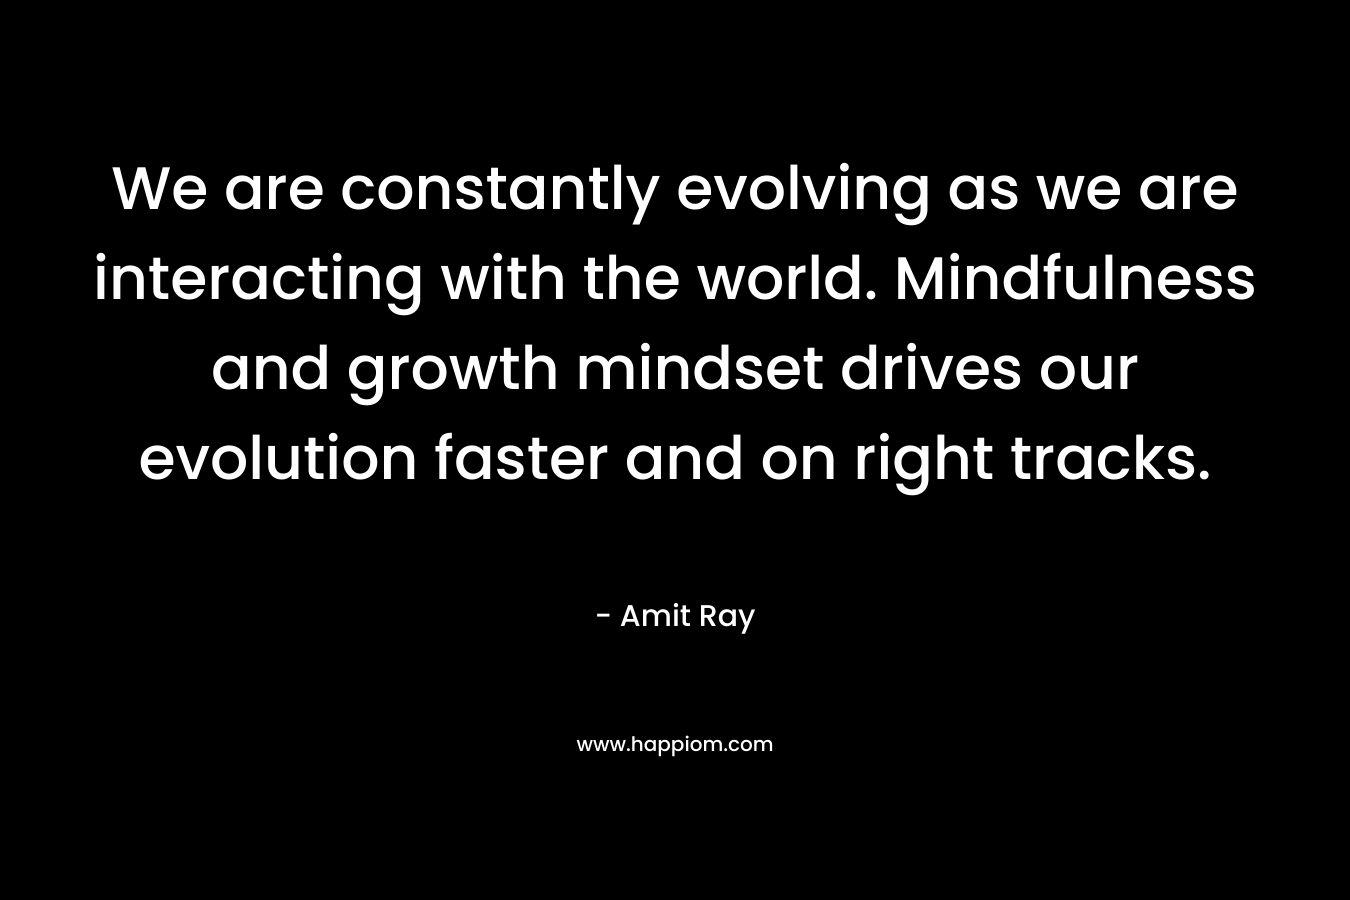 We are constantly evolving as we are interacting with the world. Mindfulness and growth mindset drives our evolution faster and on right tracks. – Amit Ray